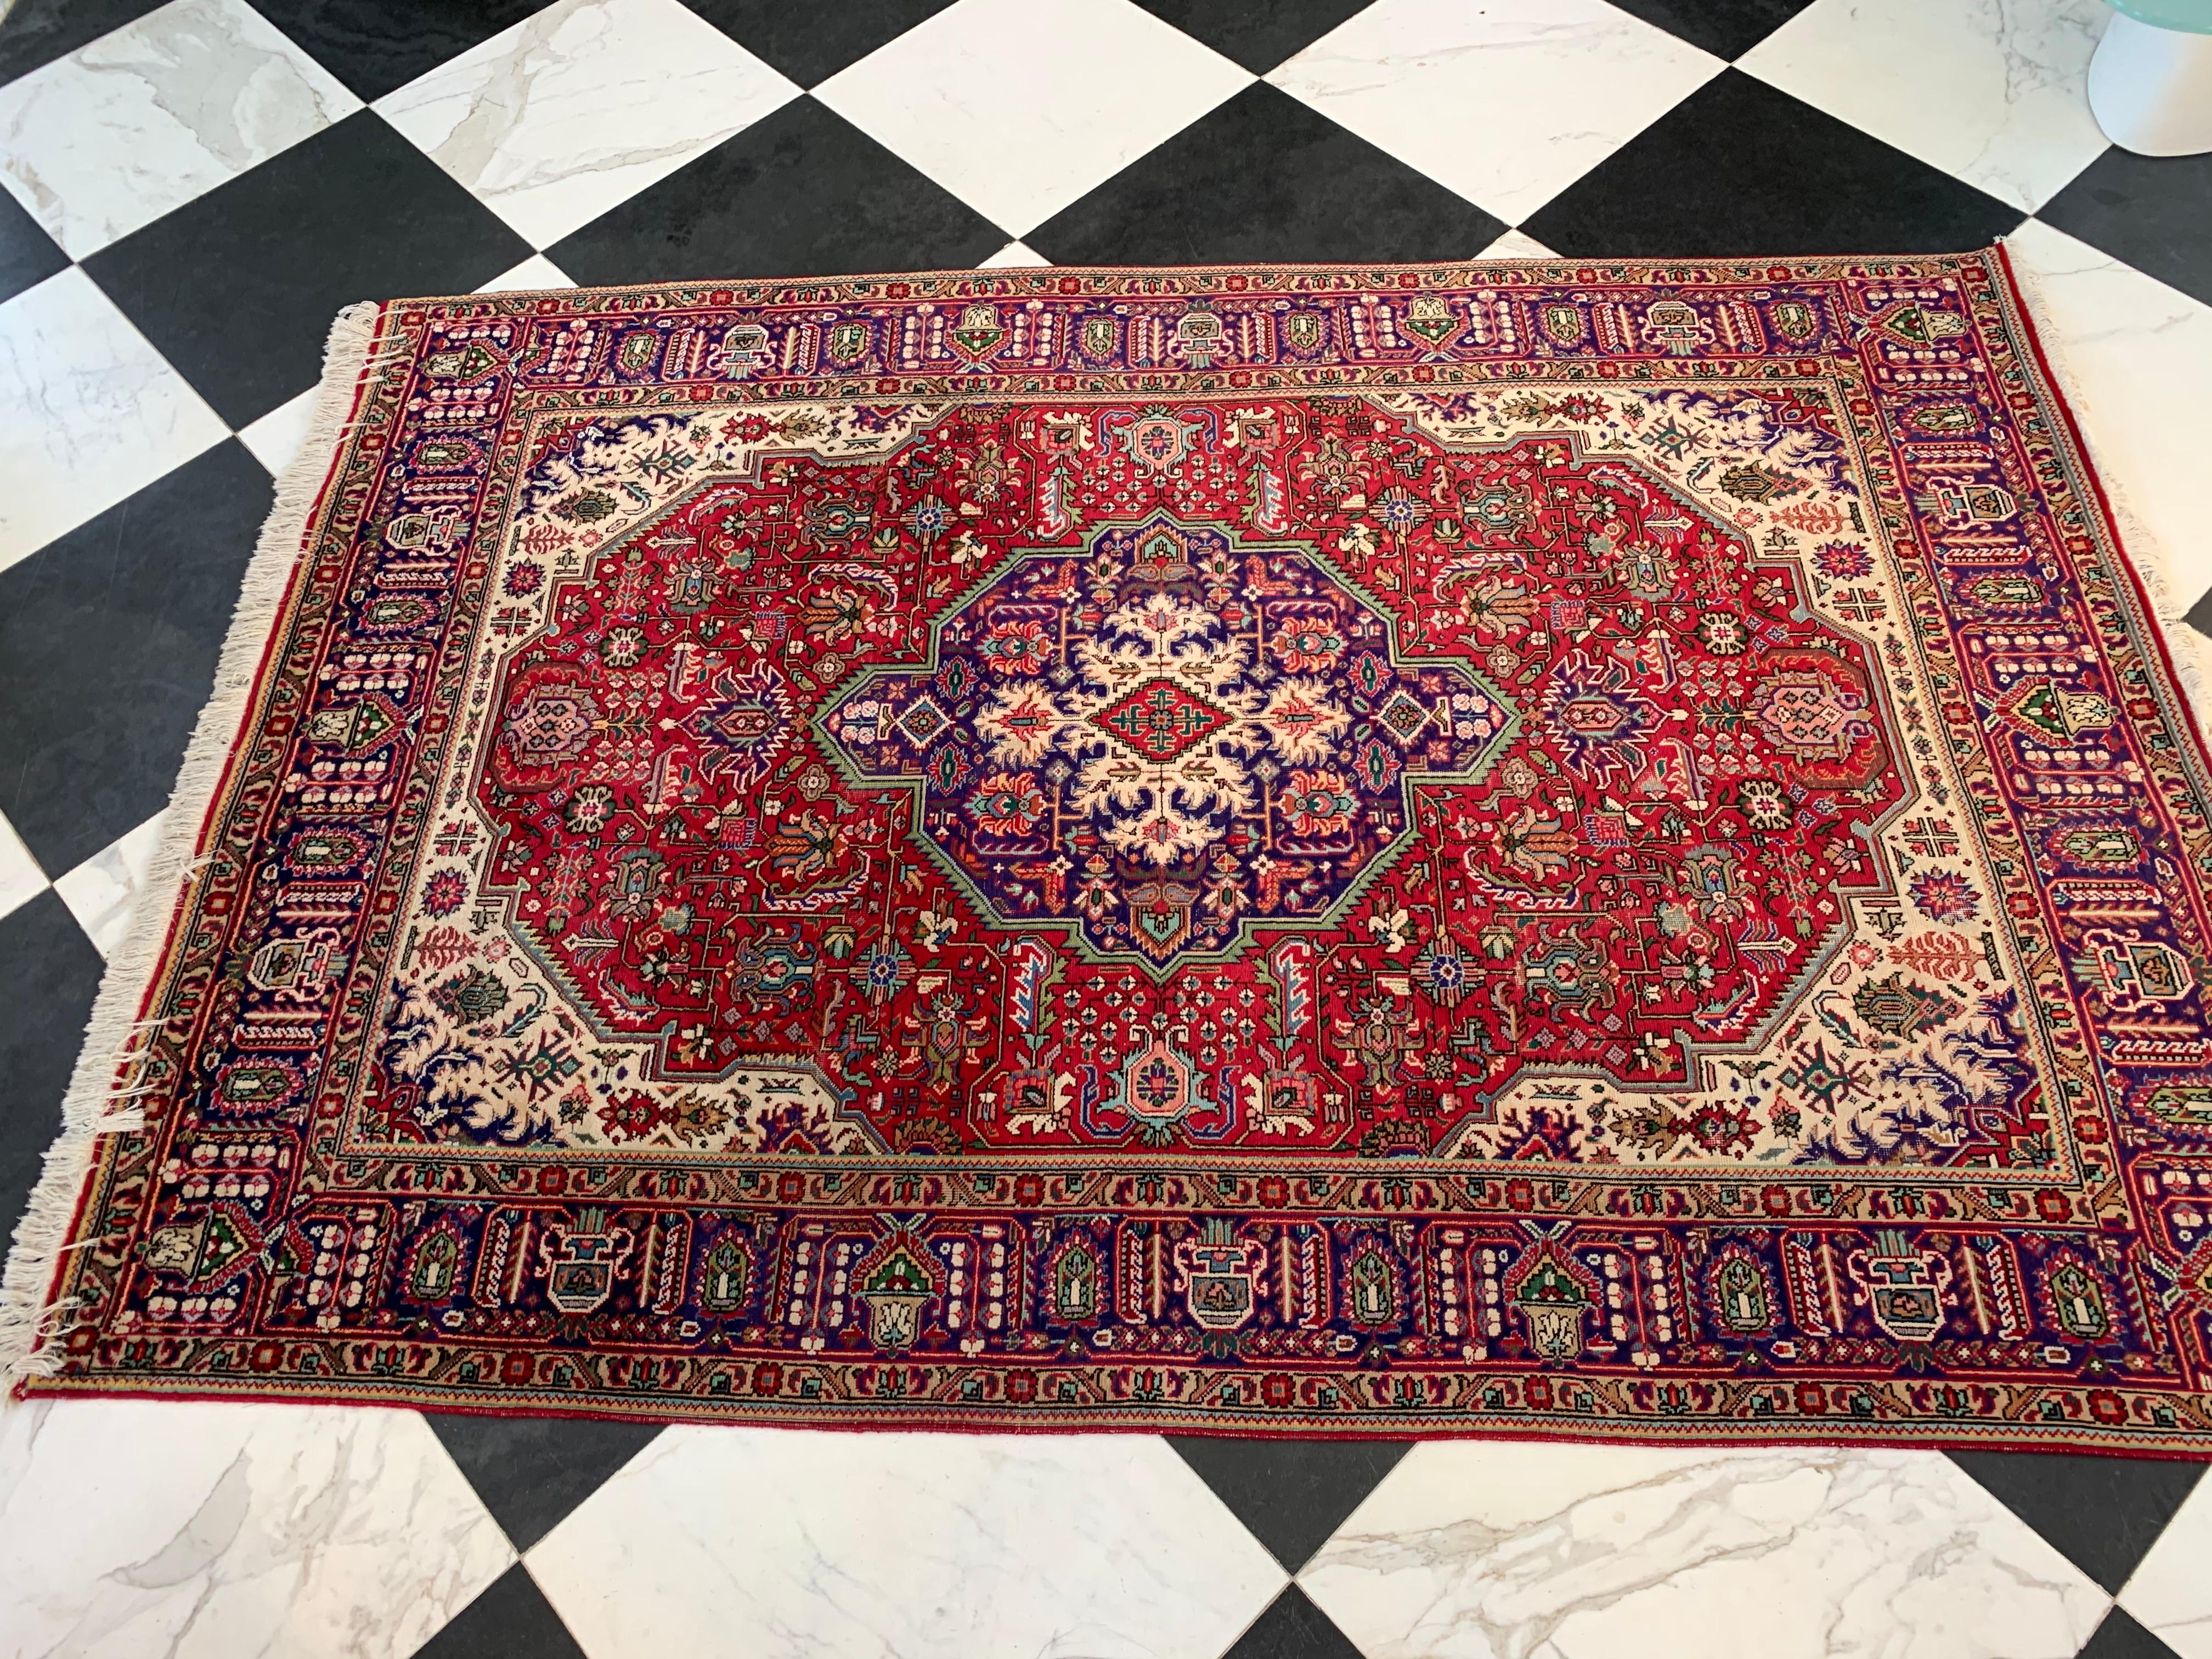 This Tabriz rug has it’s original manufacturing label still attached. A beautiful Center Medallion in the traditional weaving style is in the center. The colors range from red, ivory, blues to deep purples.
 